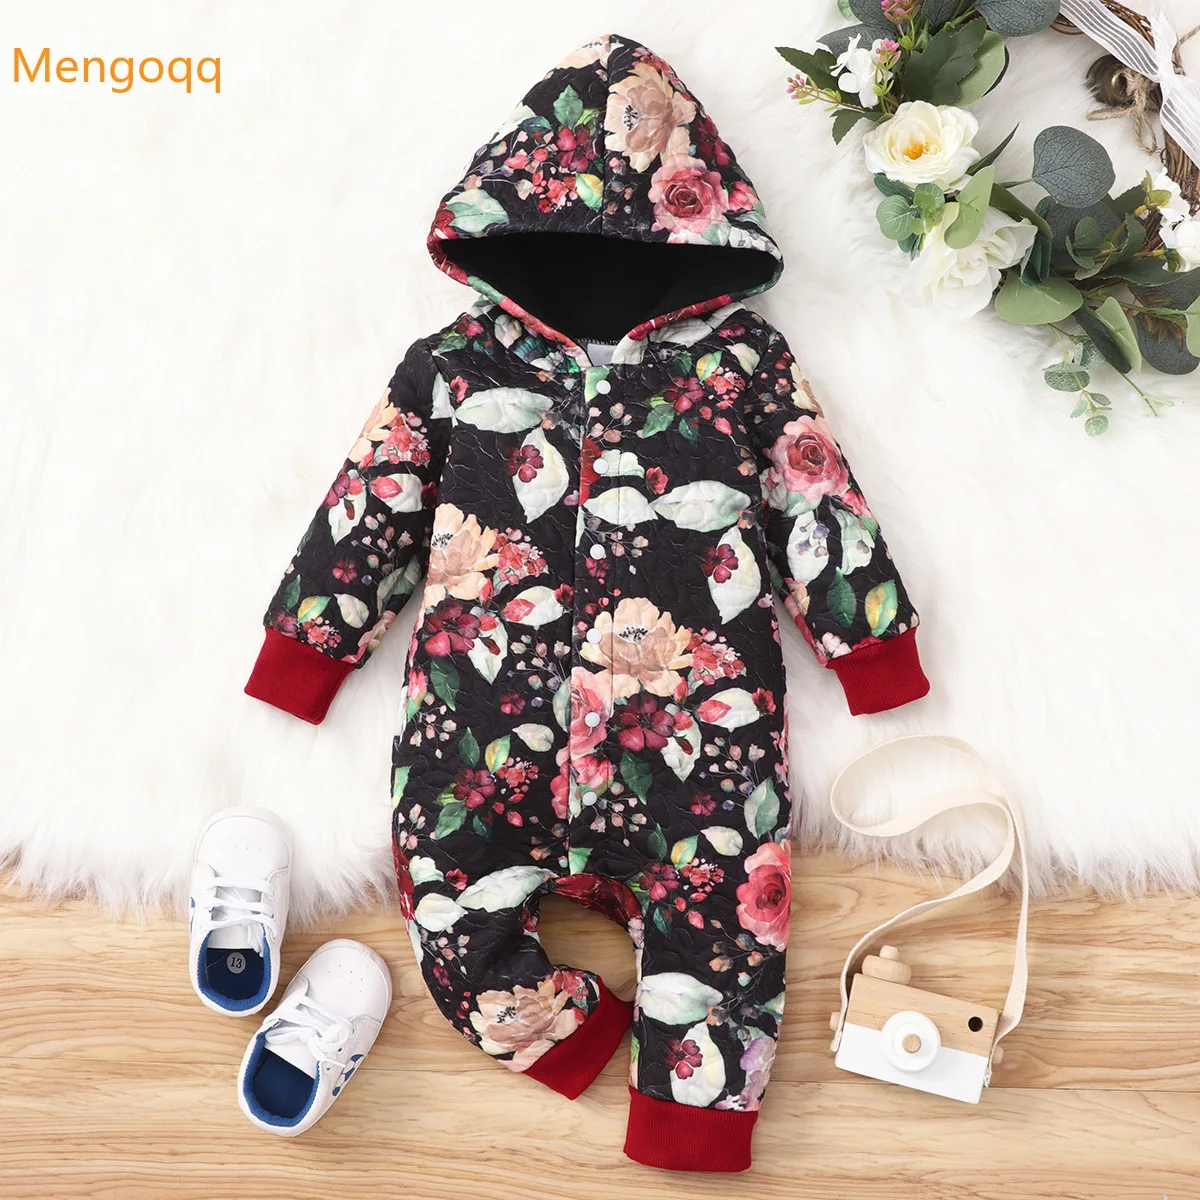 

Newborn Baby Girls Flower Full Sleeve Hooded Outfits Kids Jumpsuits Casual Infant Clothes Sunsuits Toddler Romper 0-18M